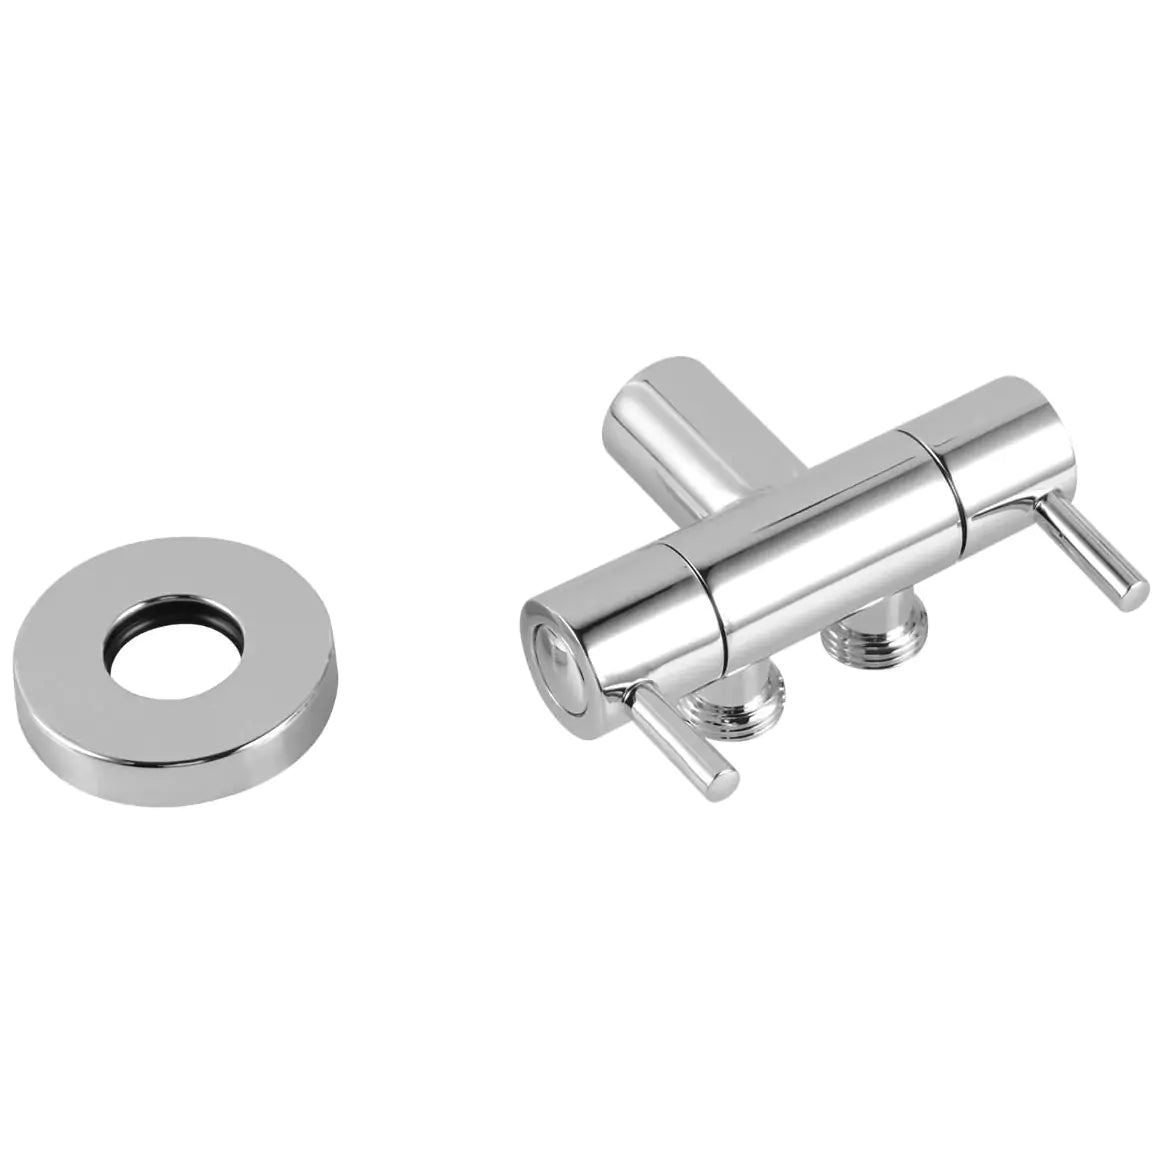 Toilet Bidet Spray Diverter with Solid Brass Construction-CH003.ST-Chrome Plated